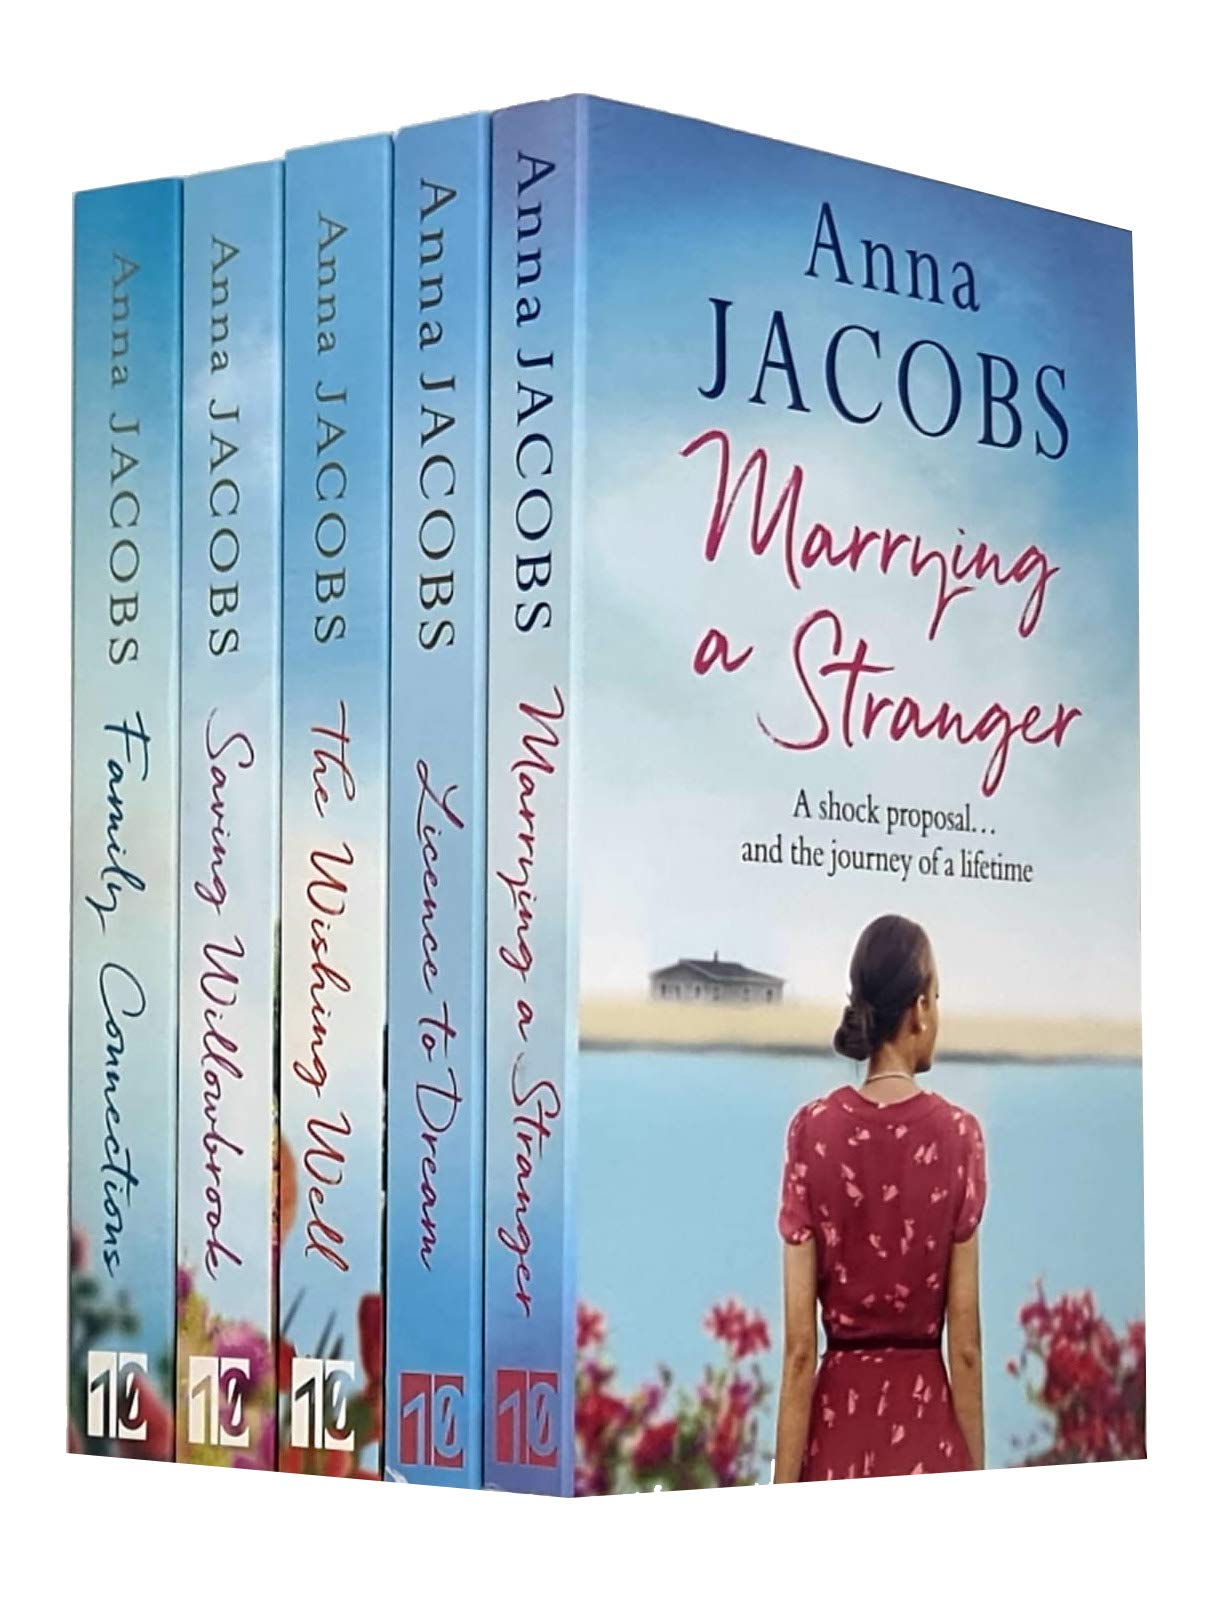 Anna Jacobs Collection 5 Books Set, Marrying a Stranger, Licence to Dream, Wishing Well - Lets Buy Books